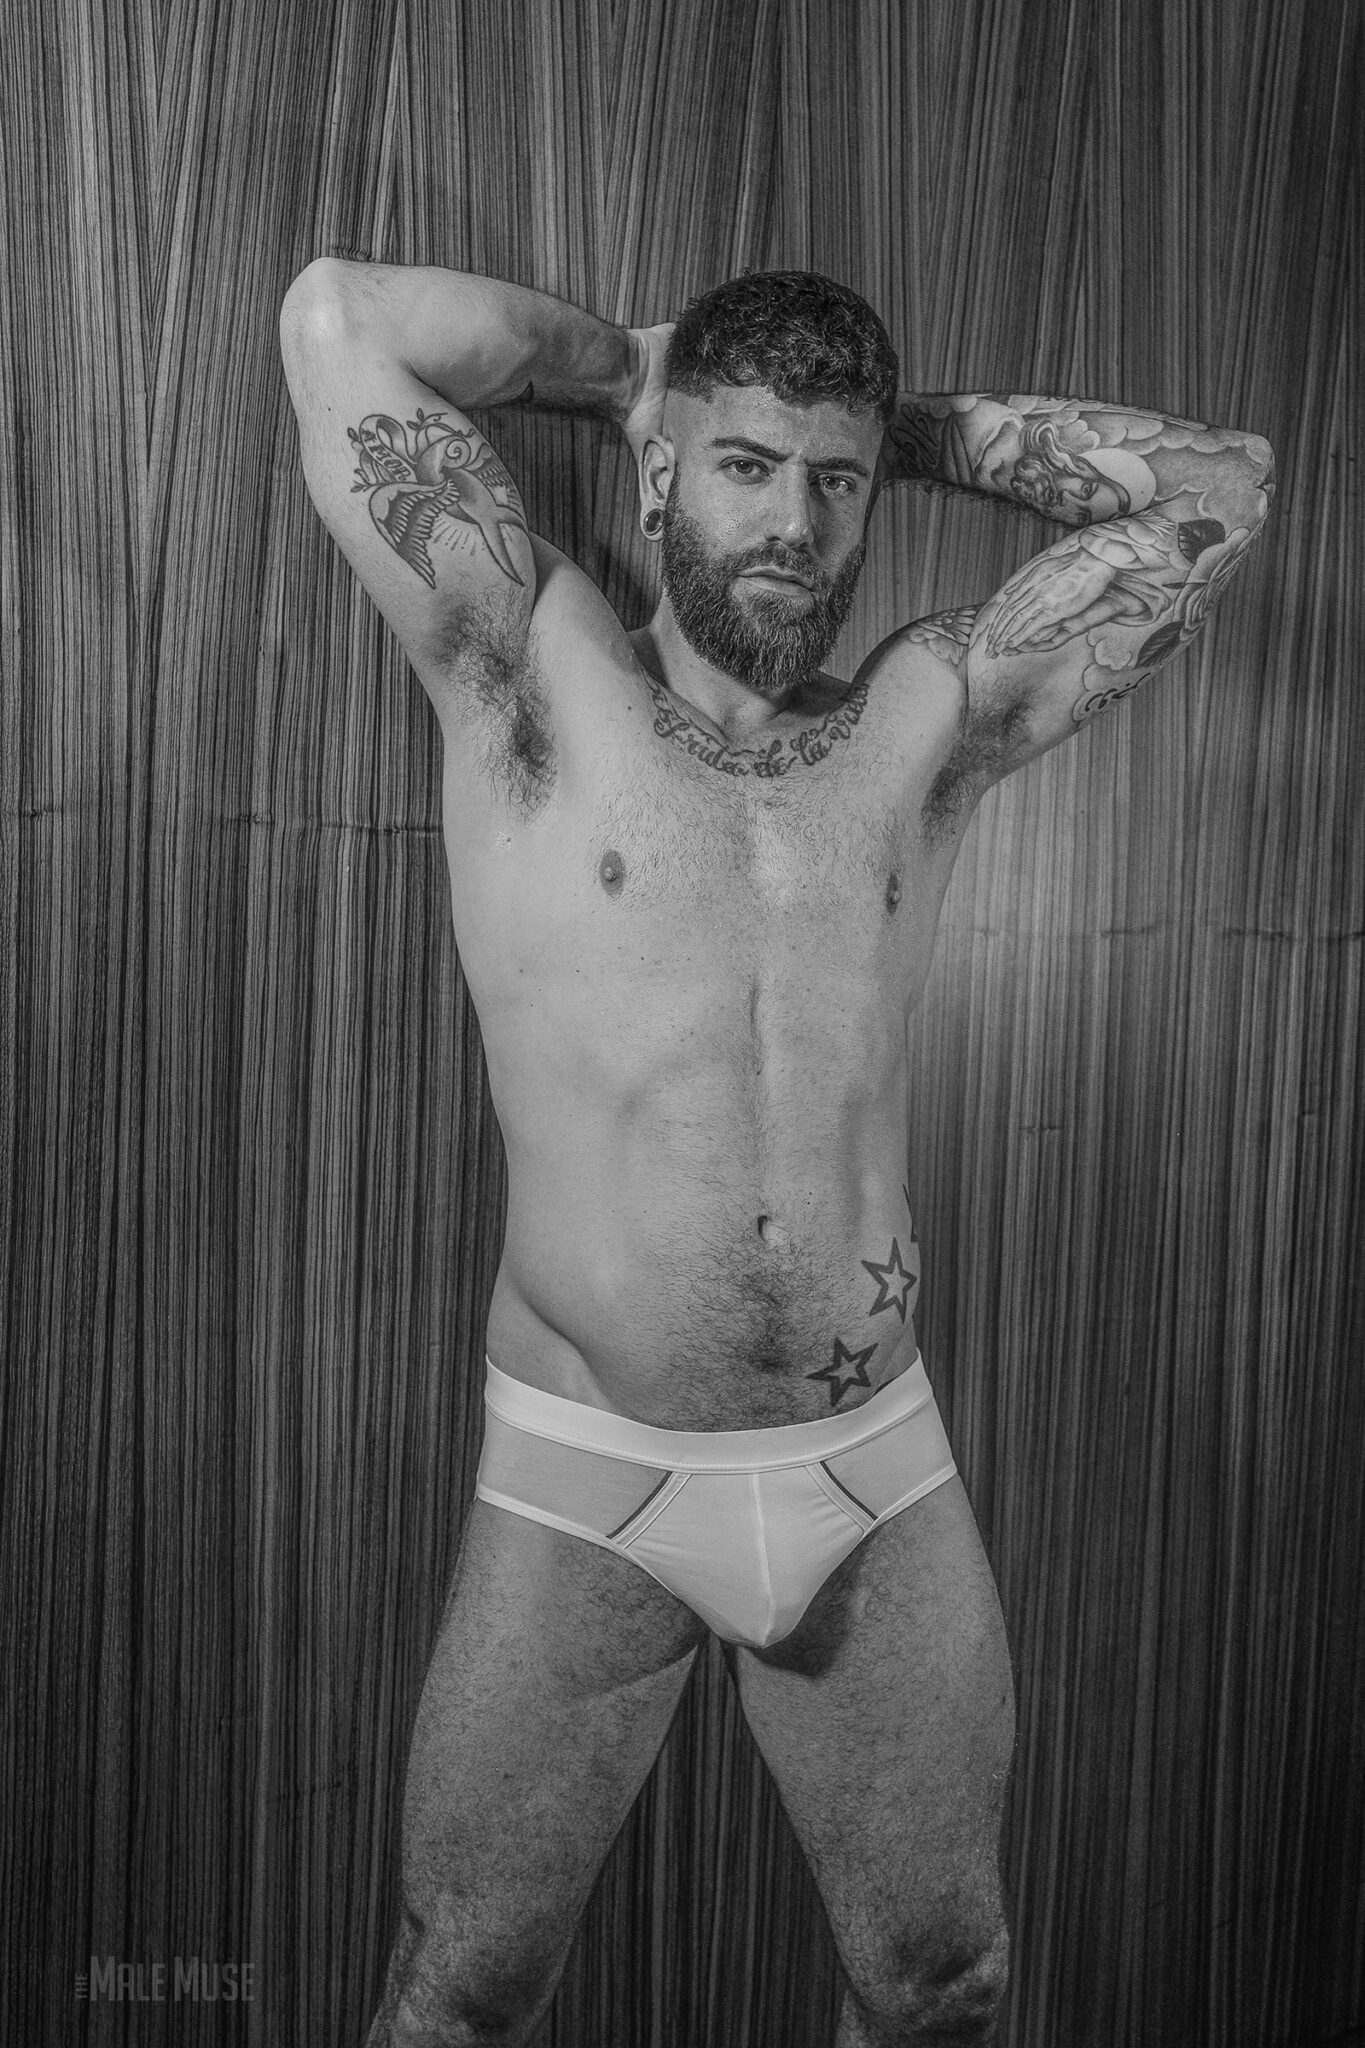 Rico Vega handsome muscle bearded tattooed hunk from the male muse themalemuse